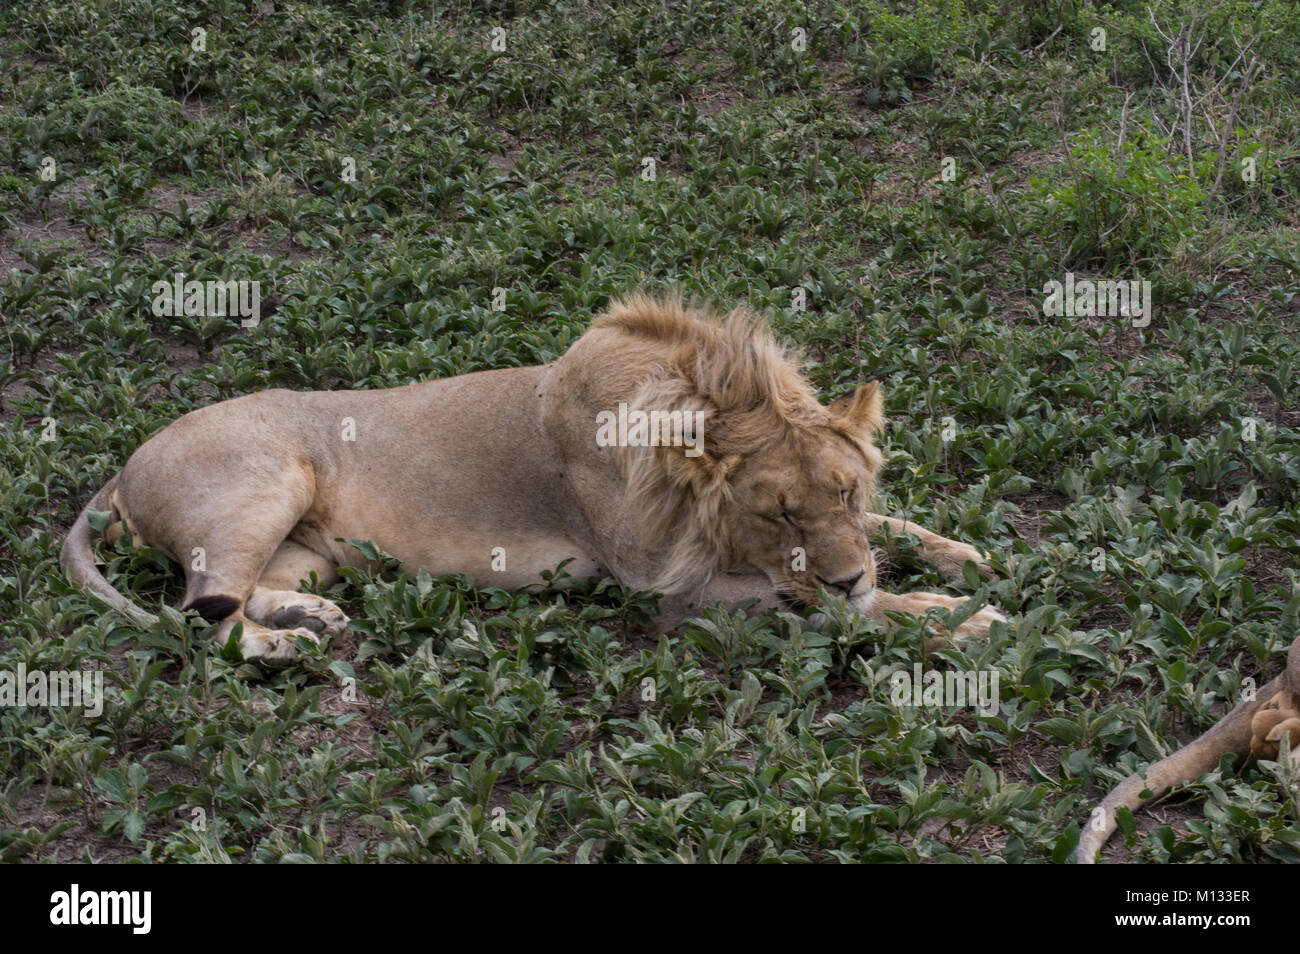 Male lion, King of the jungle, sleeping peacefully in the Serengetti in Tanzania on a lush green bed with furry paws and mane Stock Photo